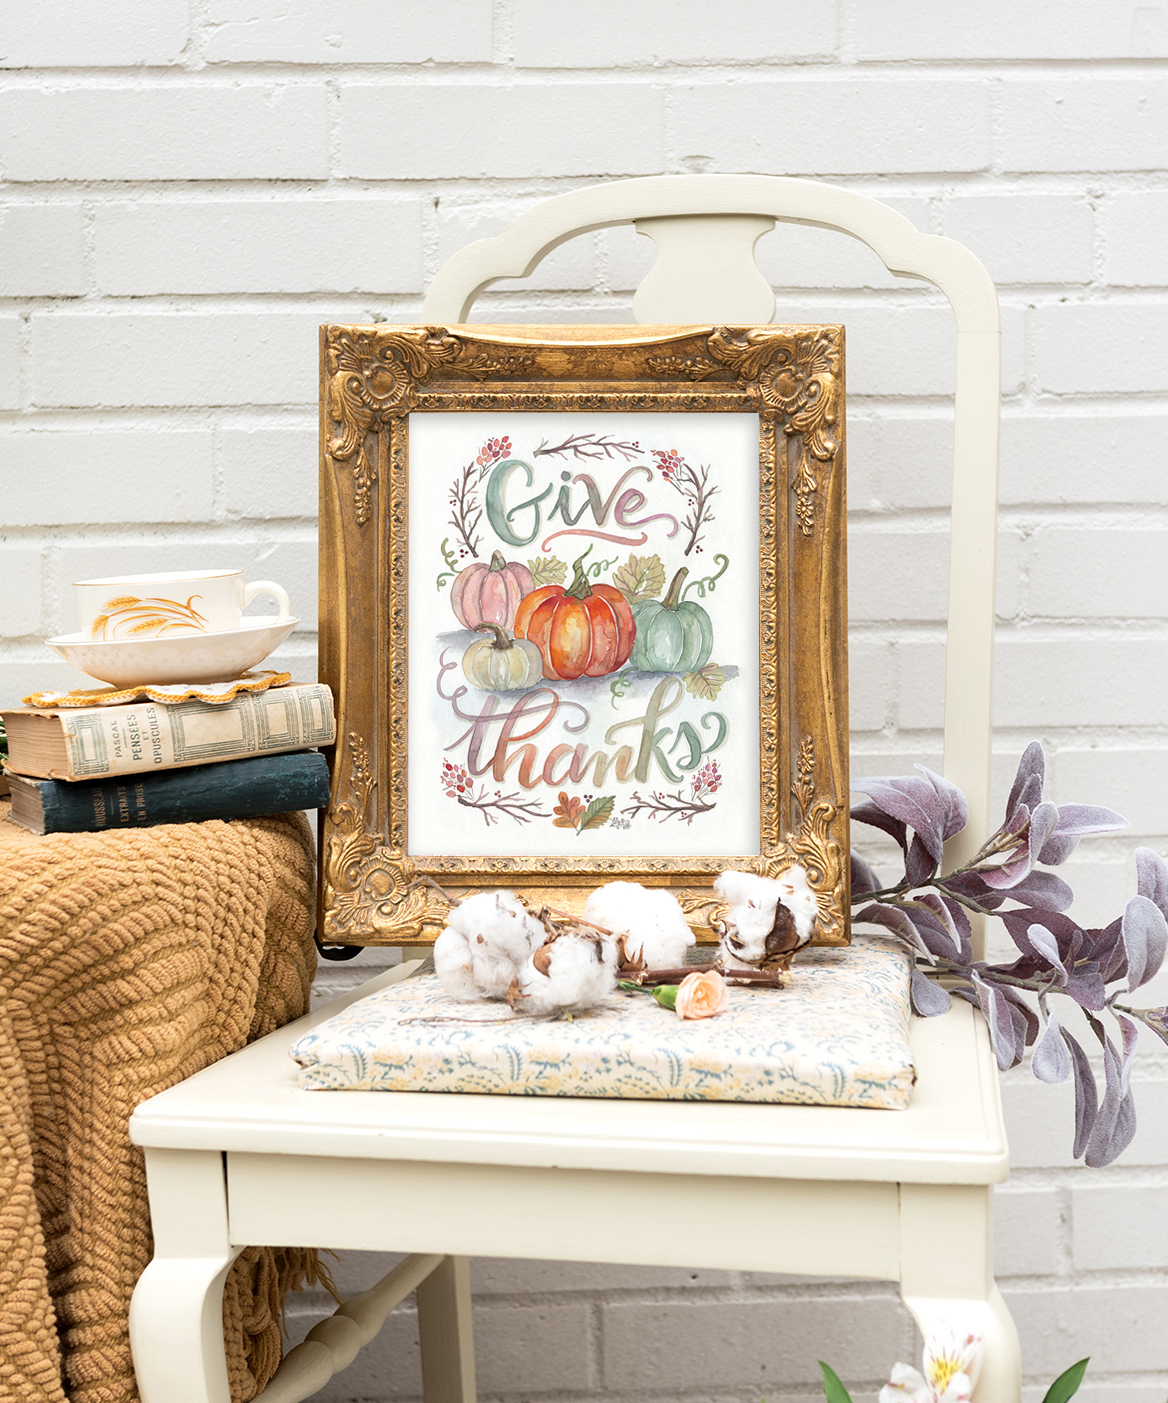 Give Thanks Watercolor Pumpkin Art for your Fall Decor | Cozy fall decor